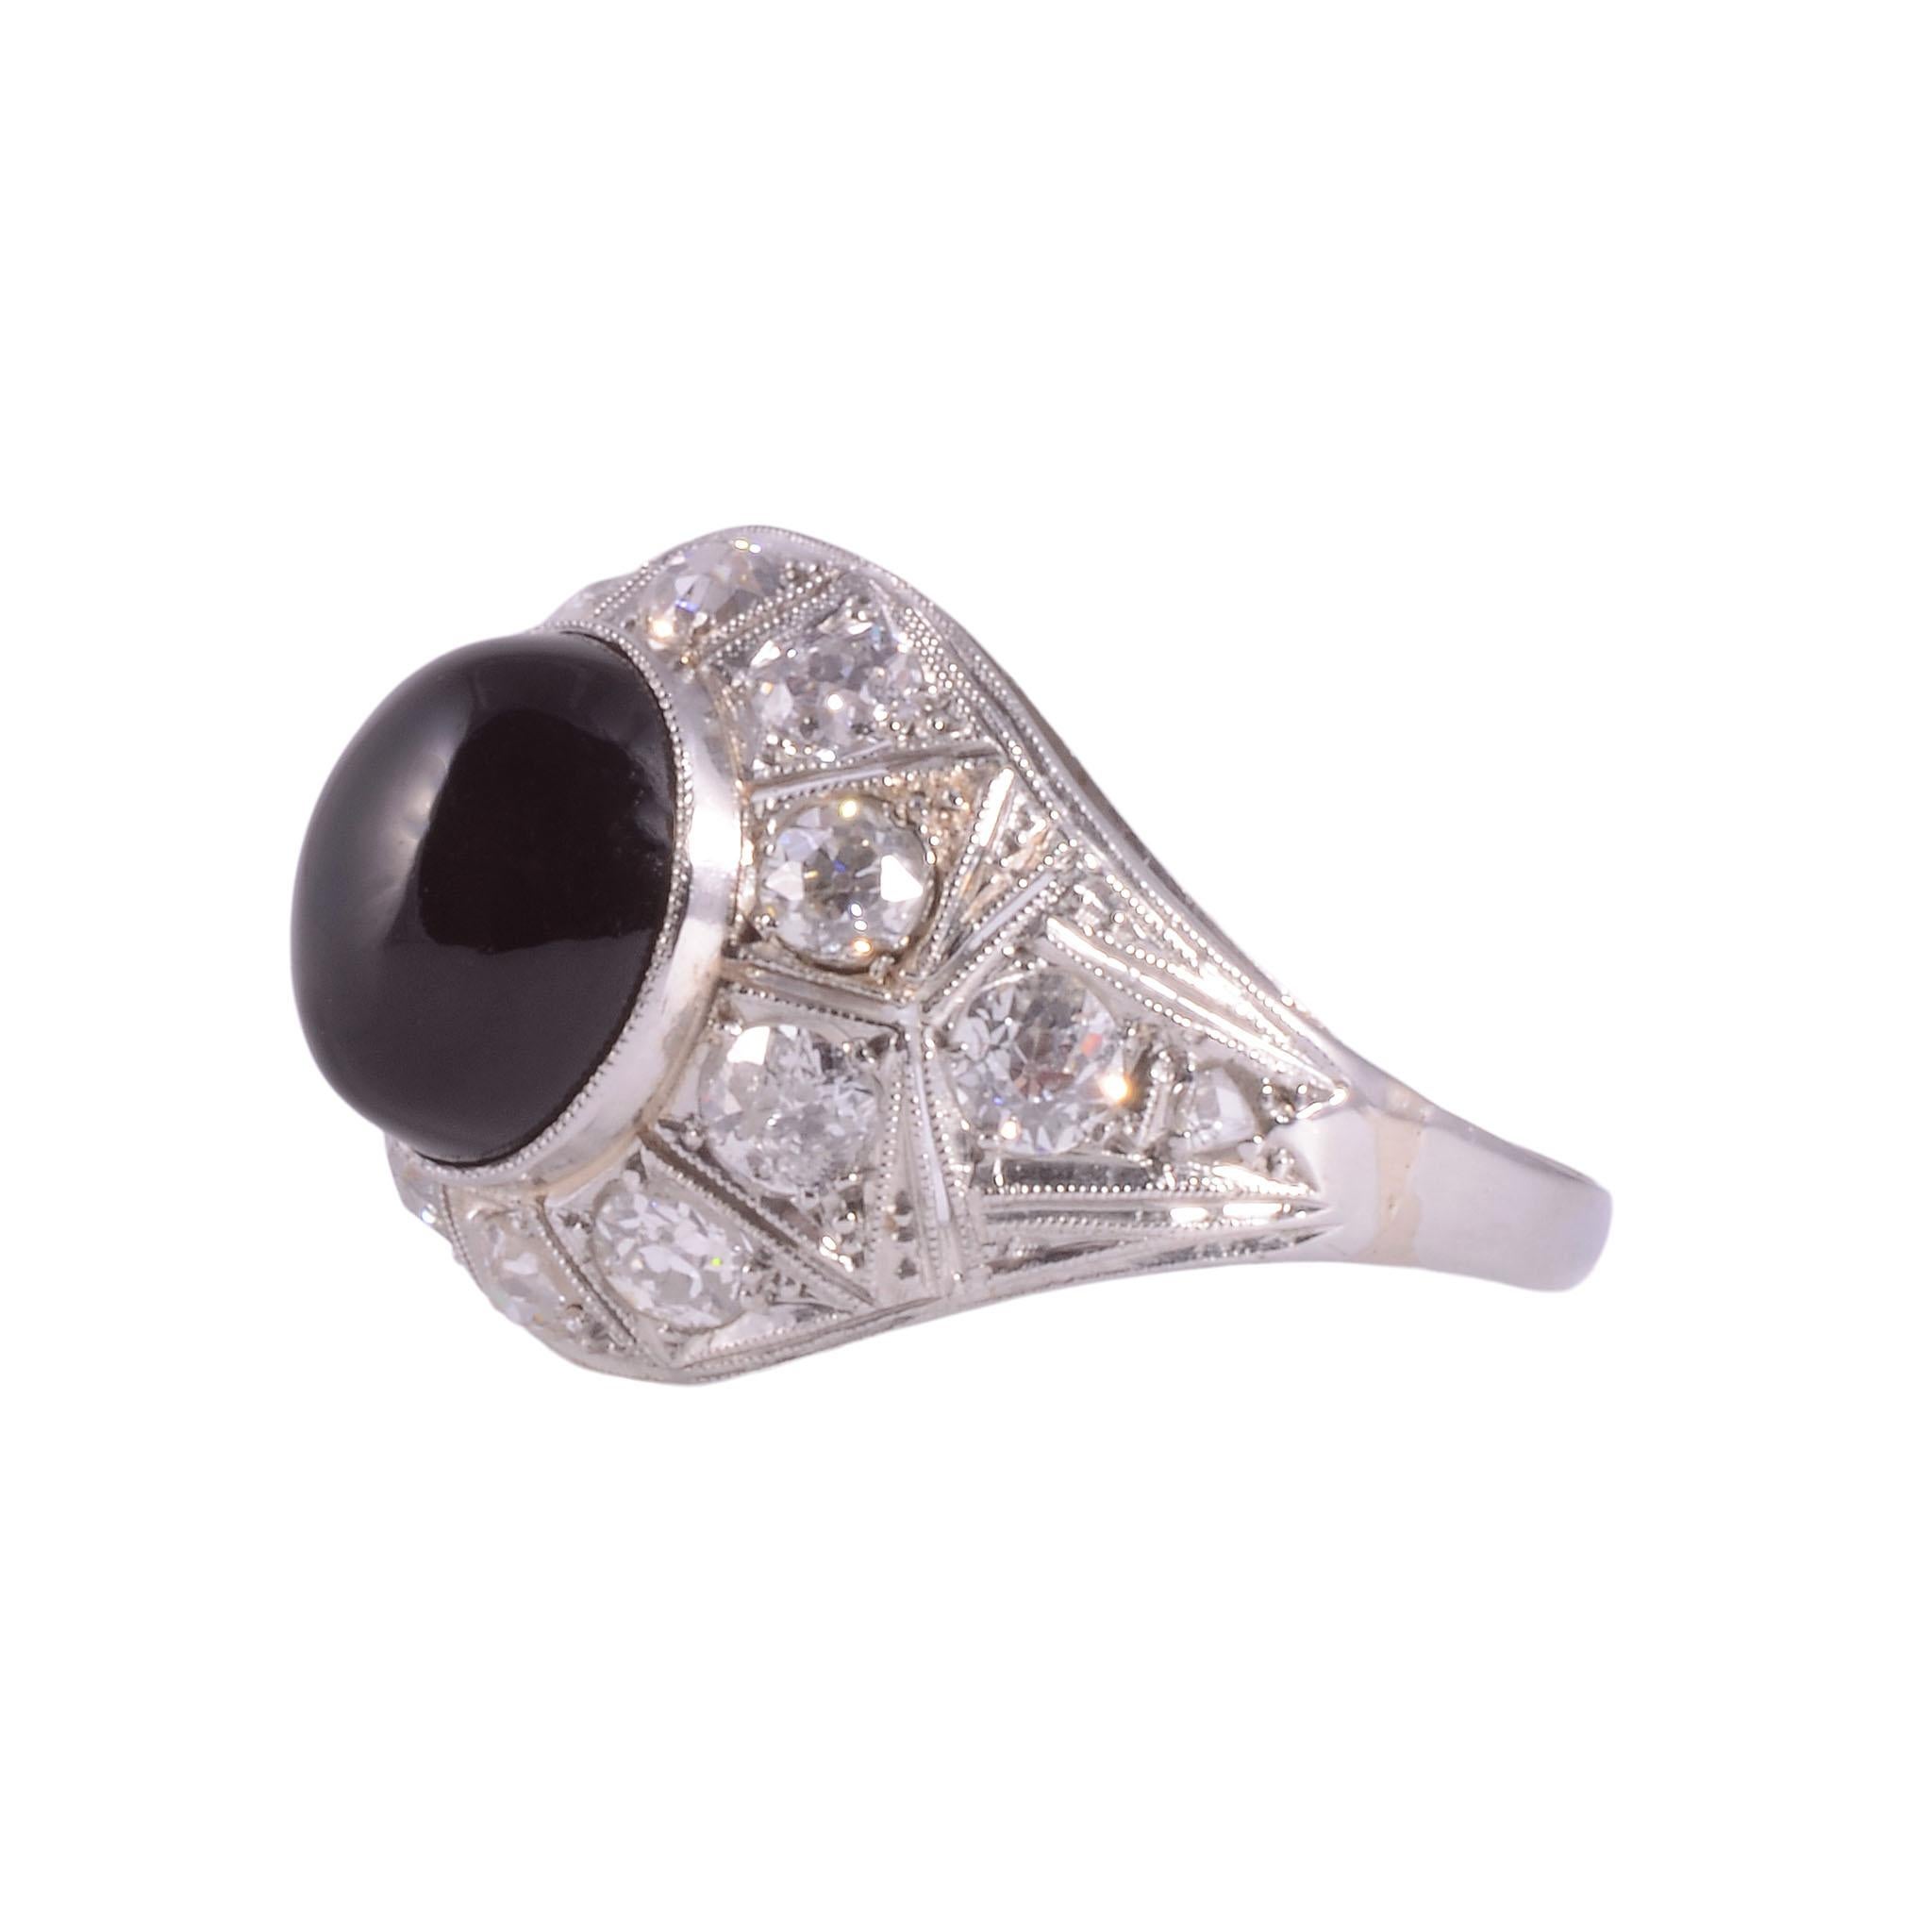 Vintage Art Deco onyx & diamond platinum ring, circa 1935. This Art Deco ring features a cabochon onyx center measuring 10.40mm x 8.85mm x 5.53mm. The onyx is accented with 13 diamond accents at 1.12 carat total weight, including eight old European